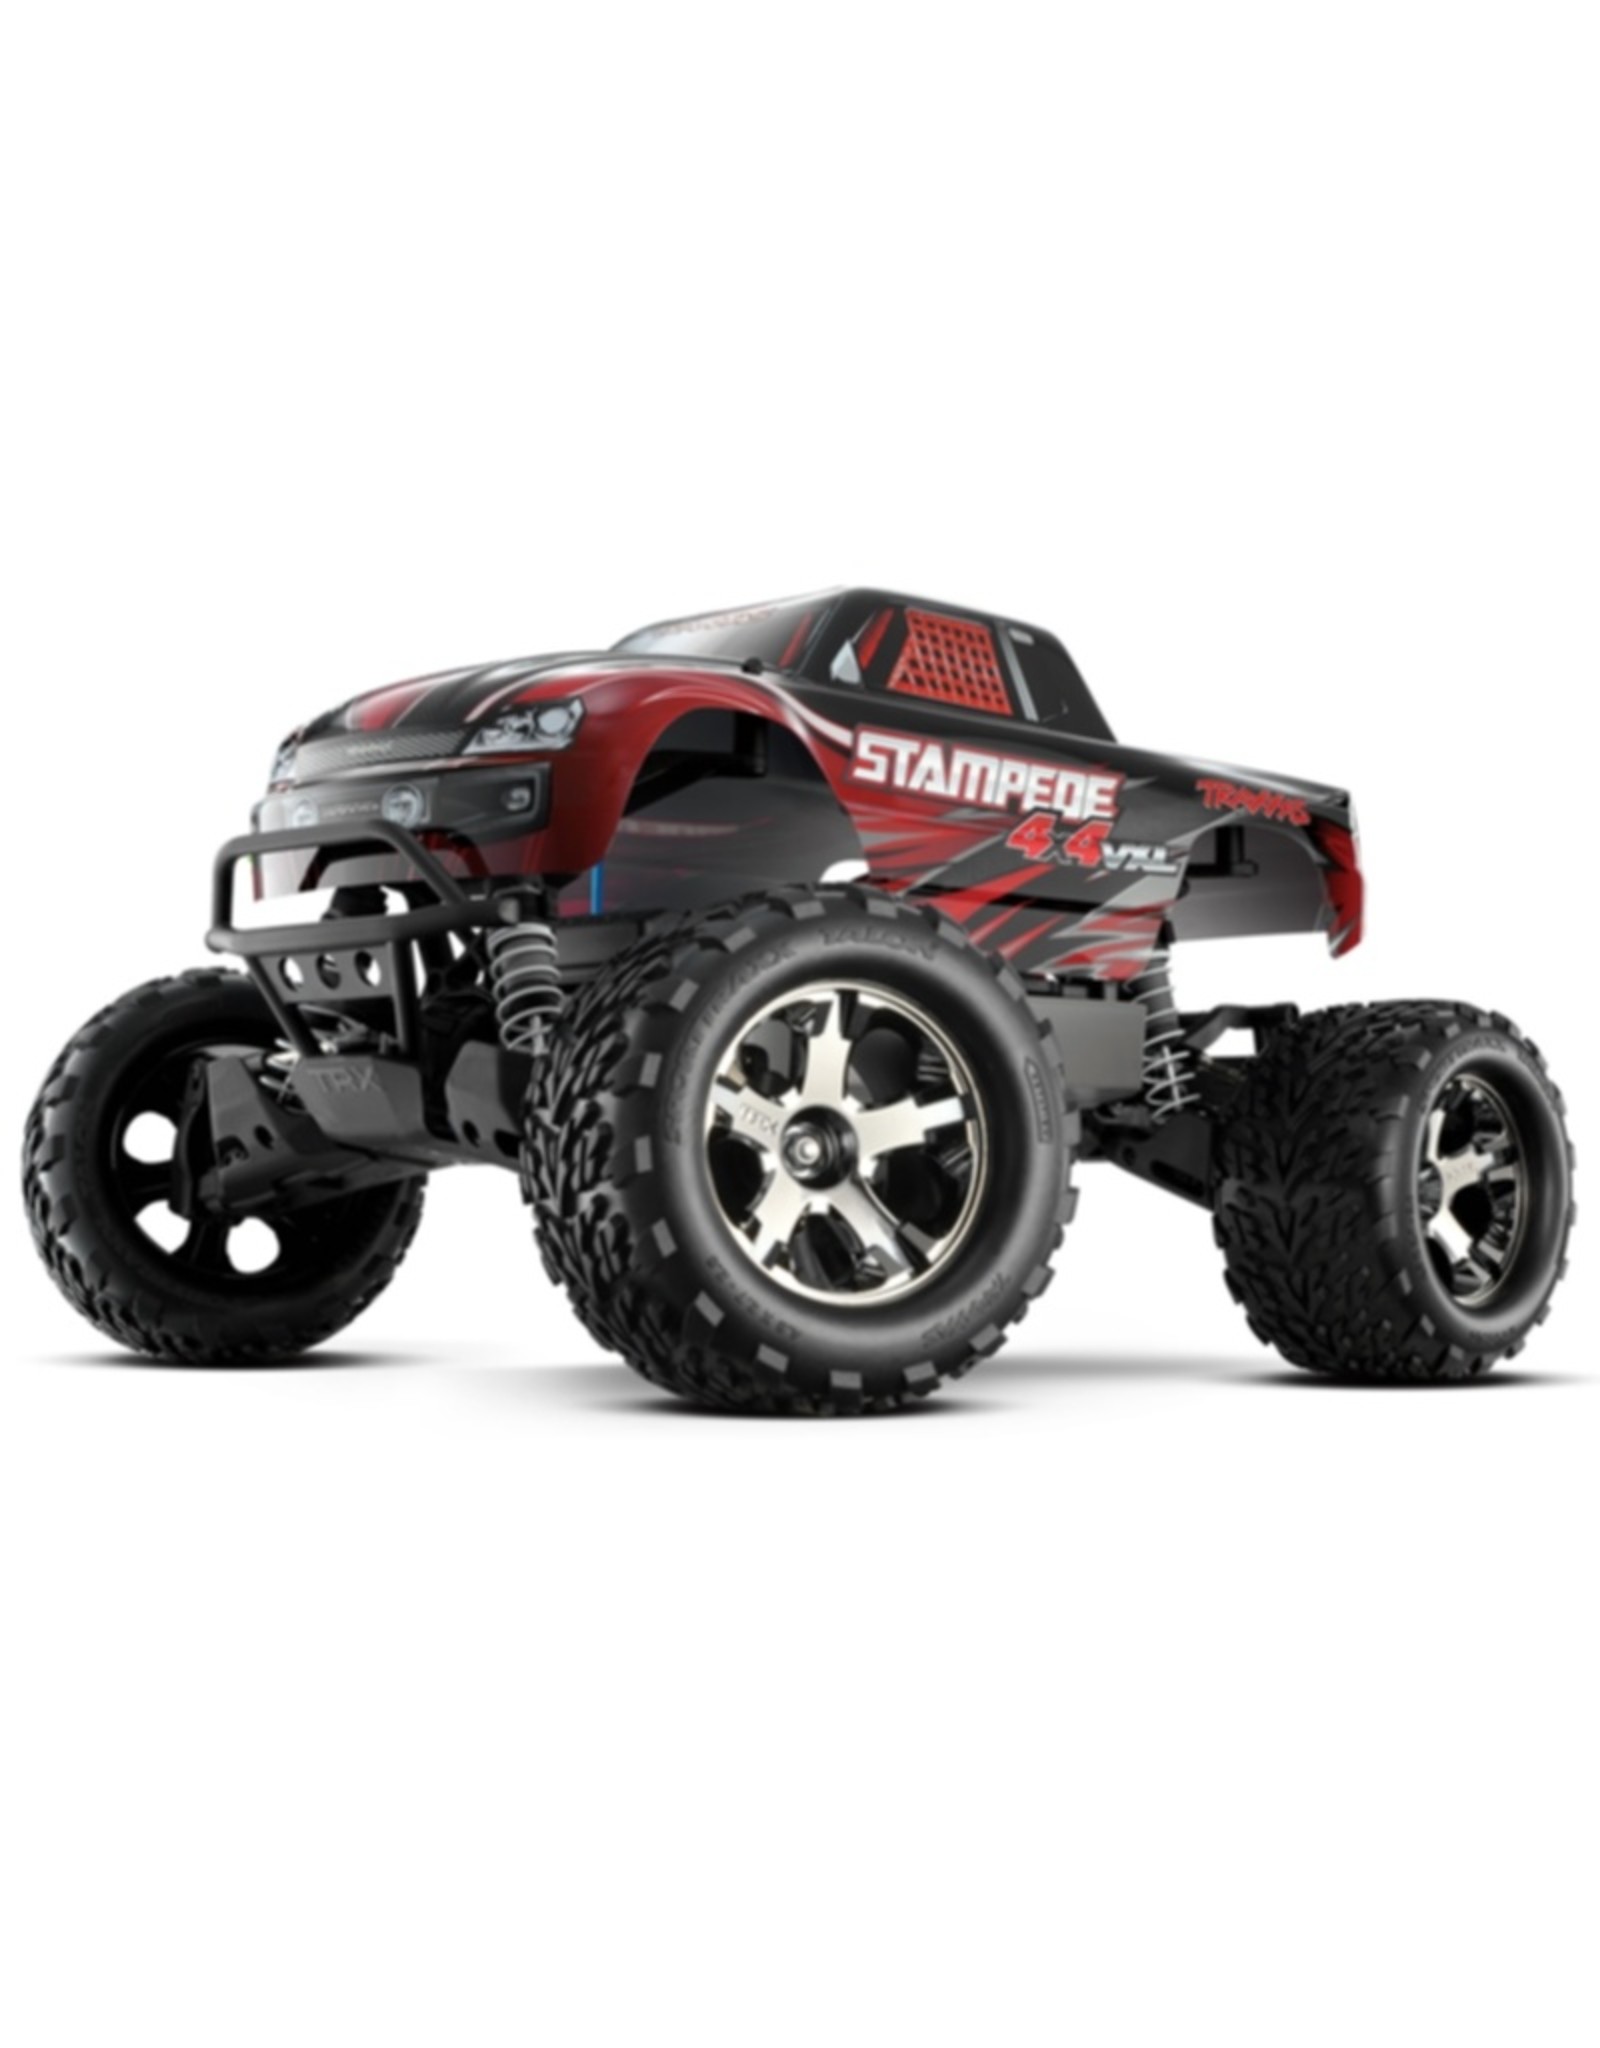 TRA TRA67086-4 Red Stampede® 4X4 VXL : 1/10 Scale Monster Truck. Ready-to-Race® with TQi Traxxas Link™ Velineon® VXL-3s brushless ESC (fwd/rev), and Traxxas Stability Management (TSM)